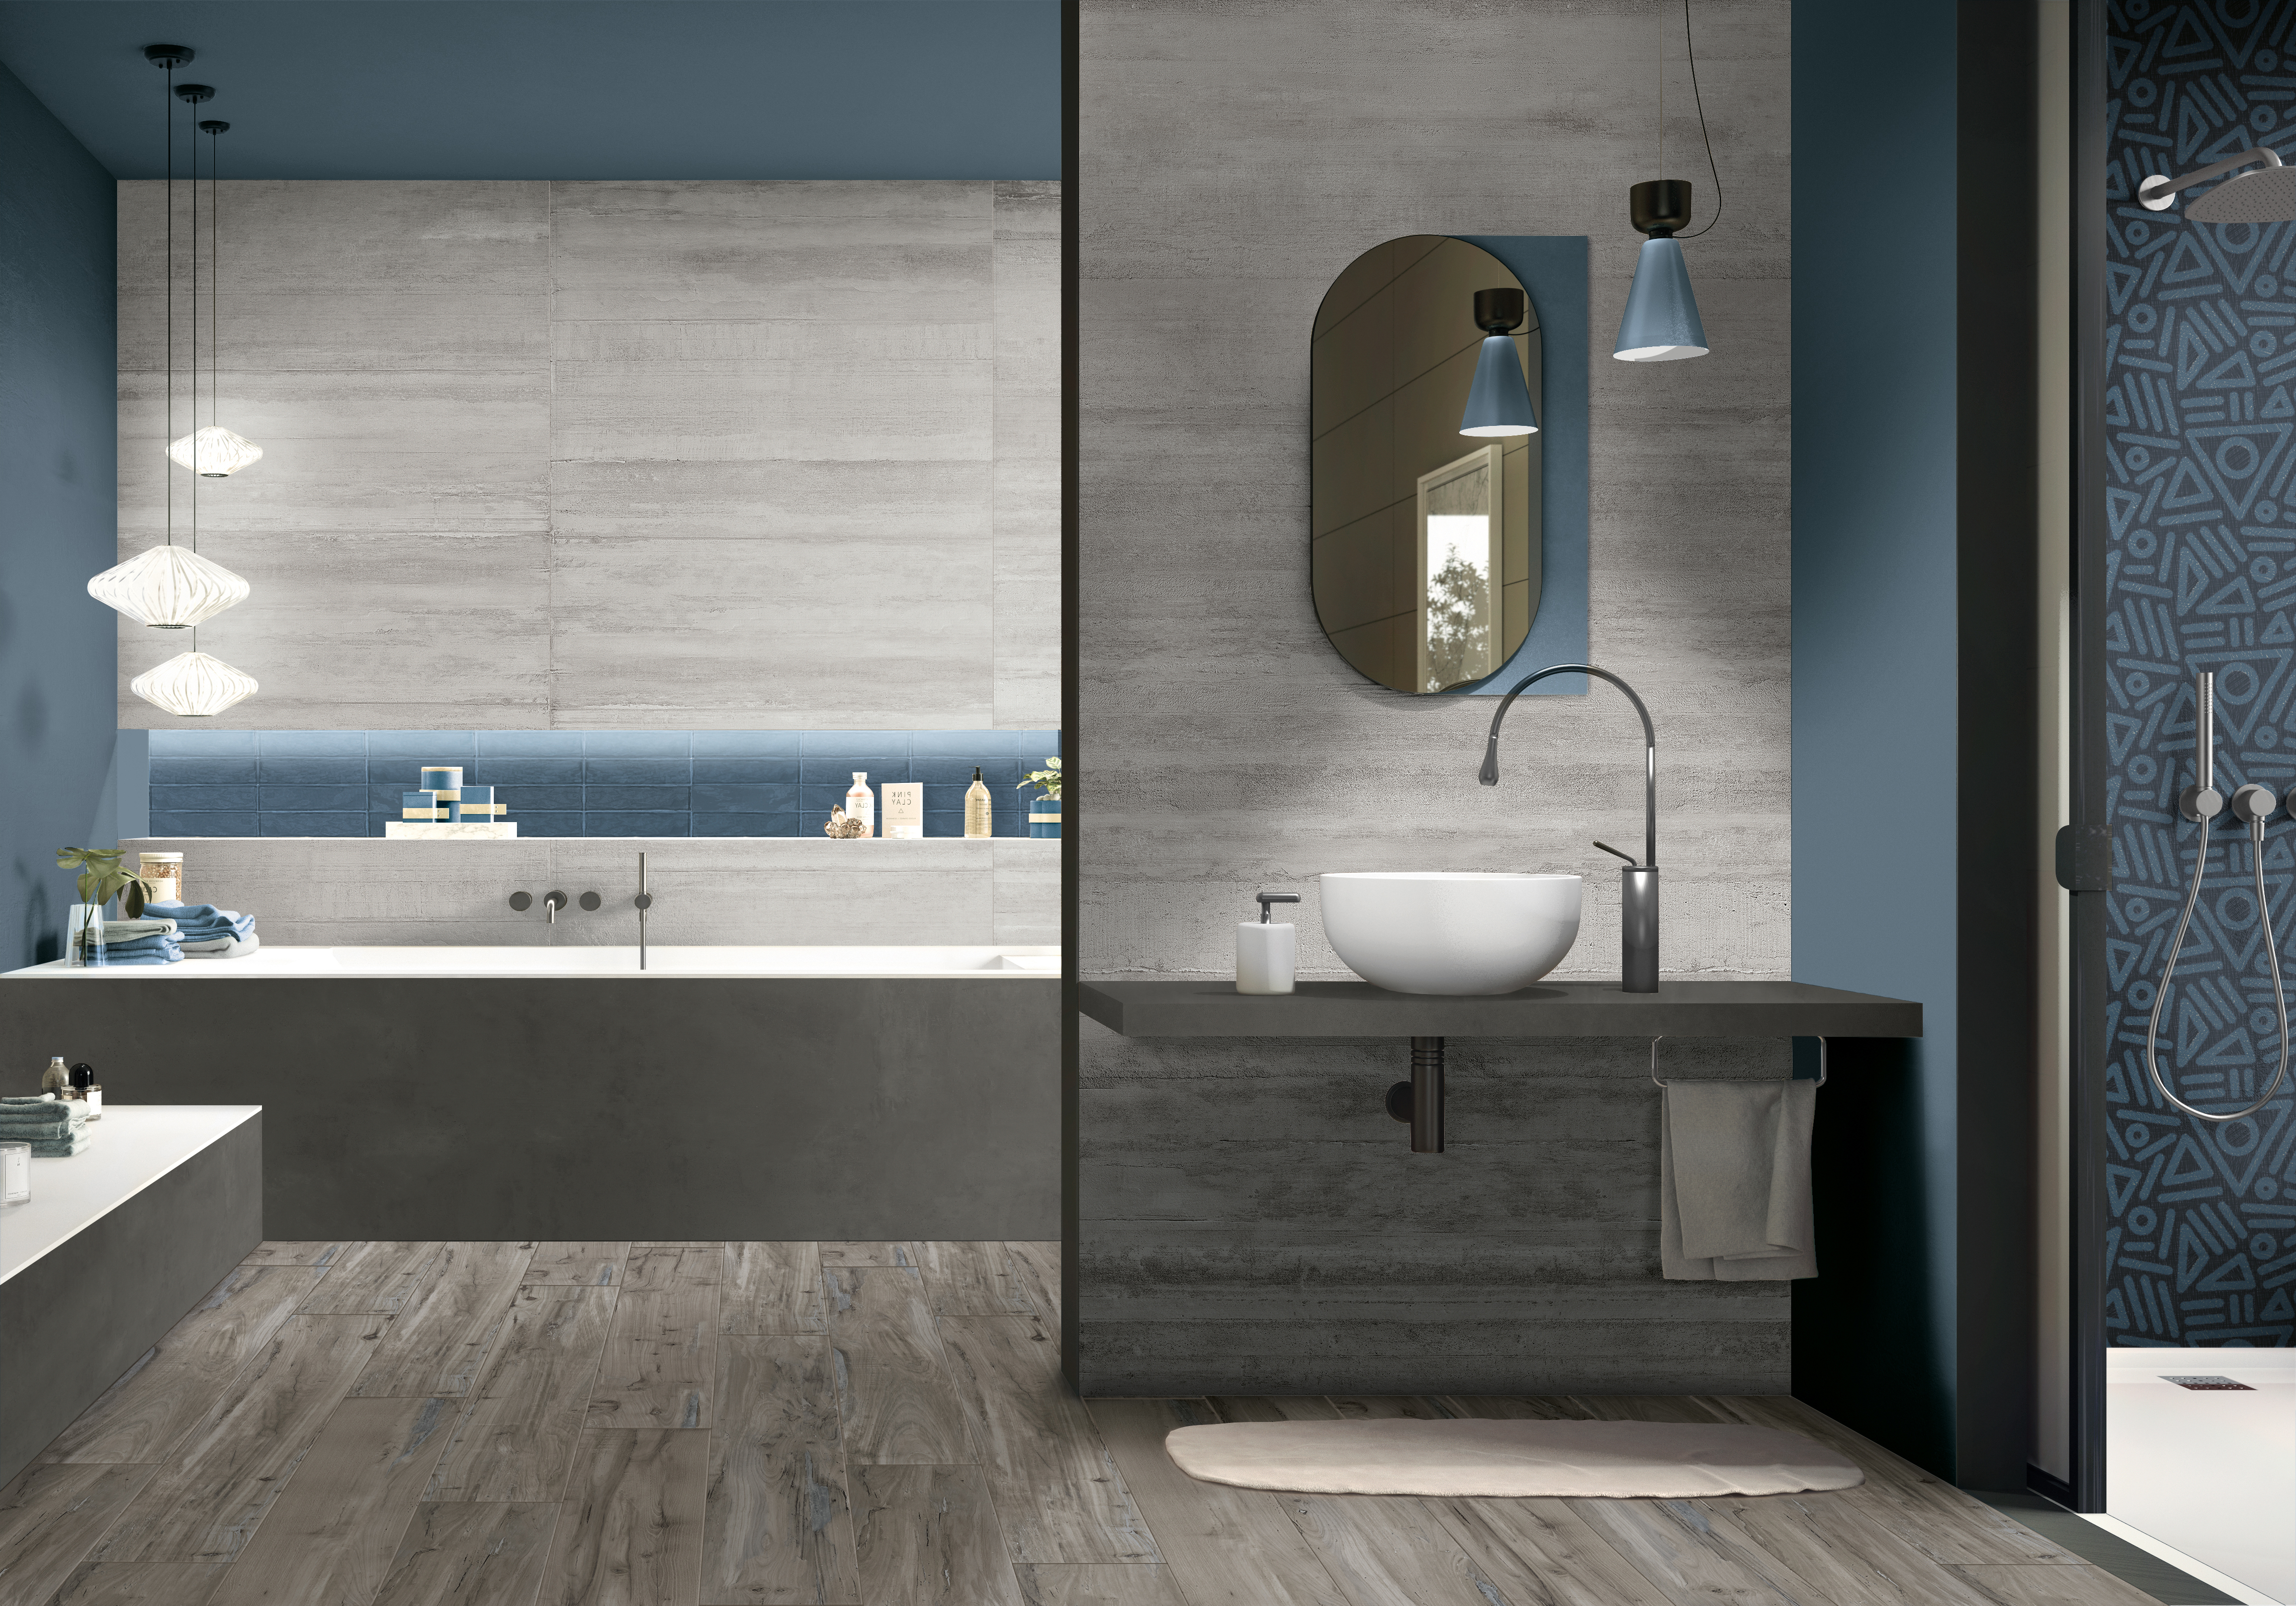 Bathroom tile by Emser Tile featuring modern bath and shower, gray and blue tones throughout room